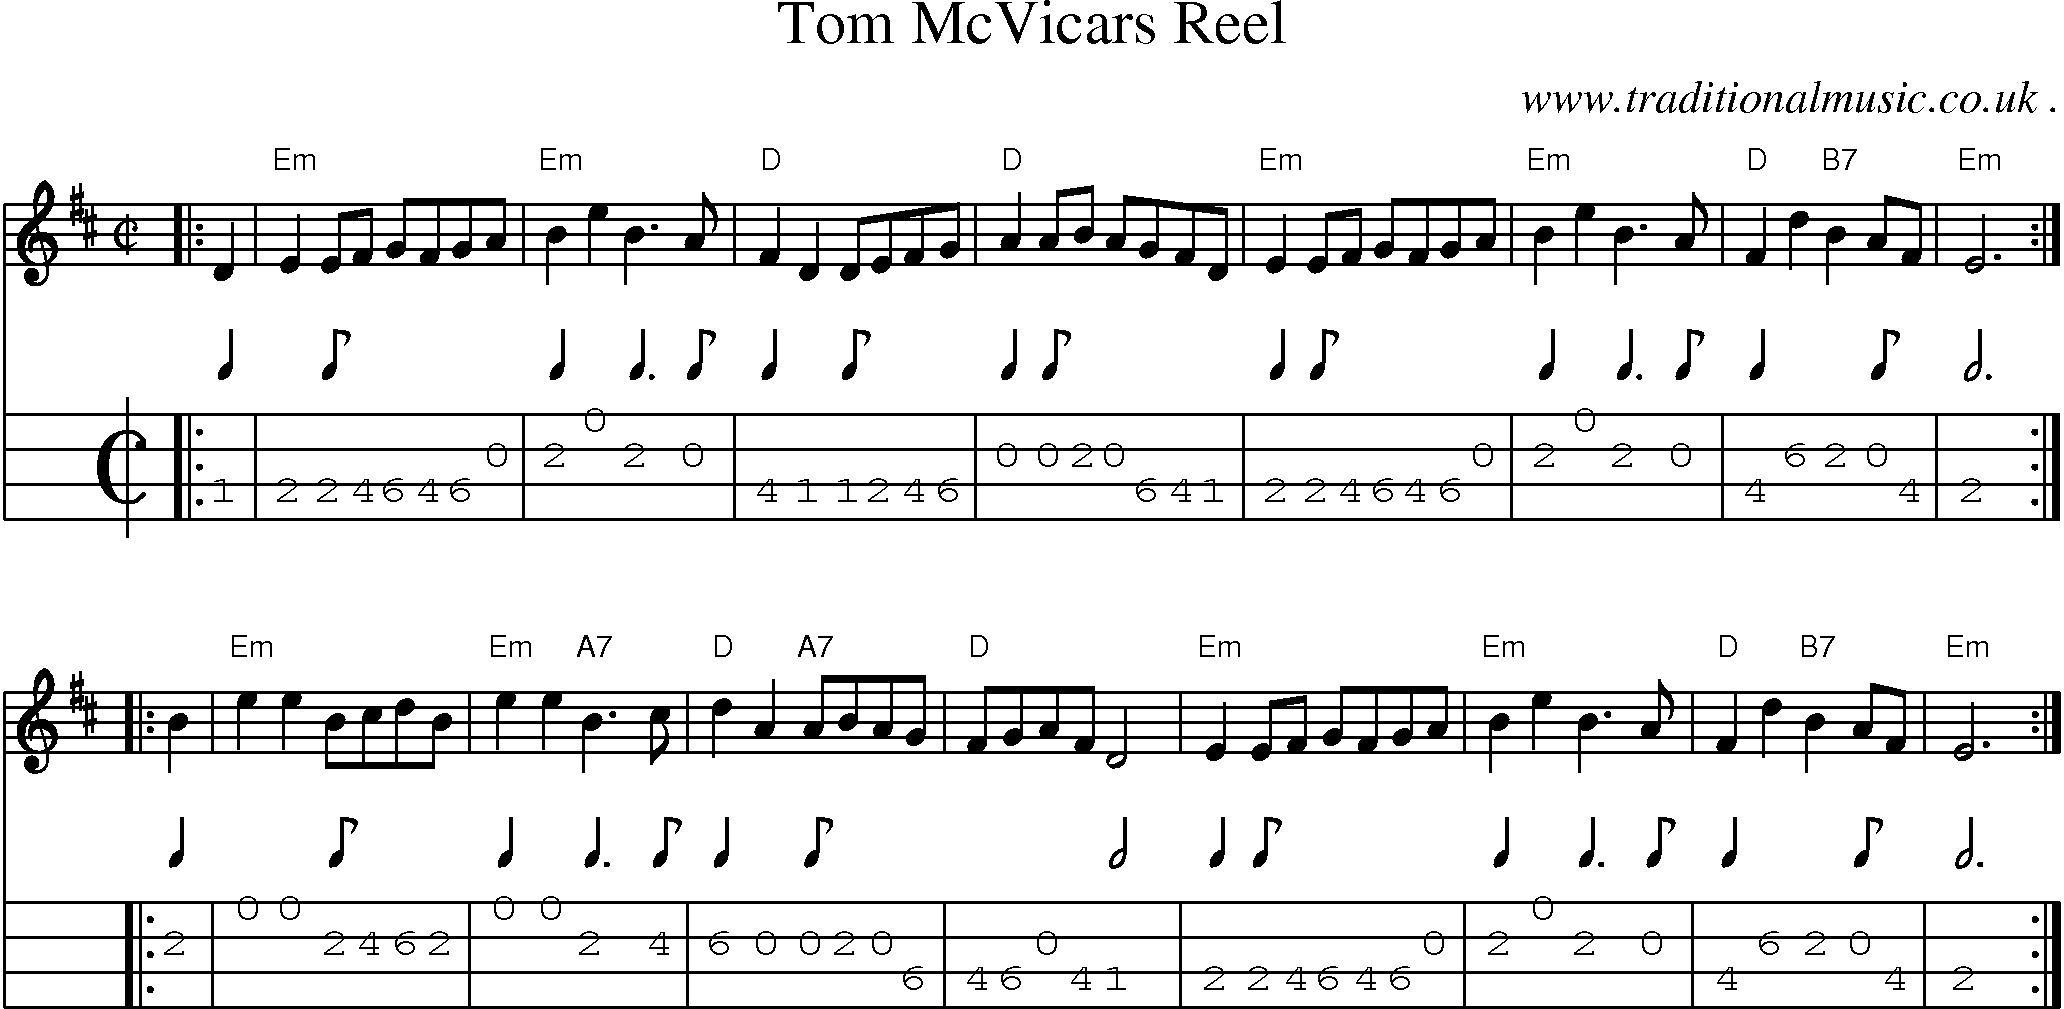 Sheet-music  score, Chords and Mandolin Tabs for Tom Mcvicars Reel